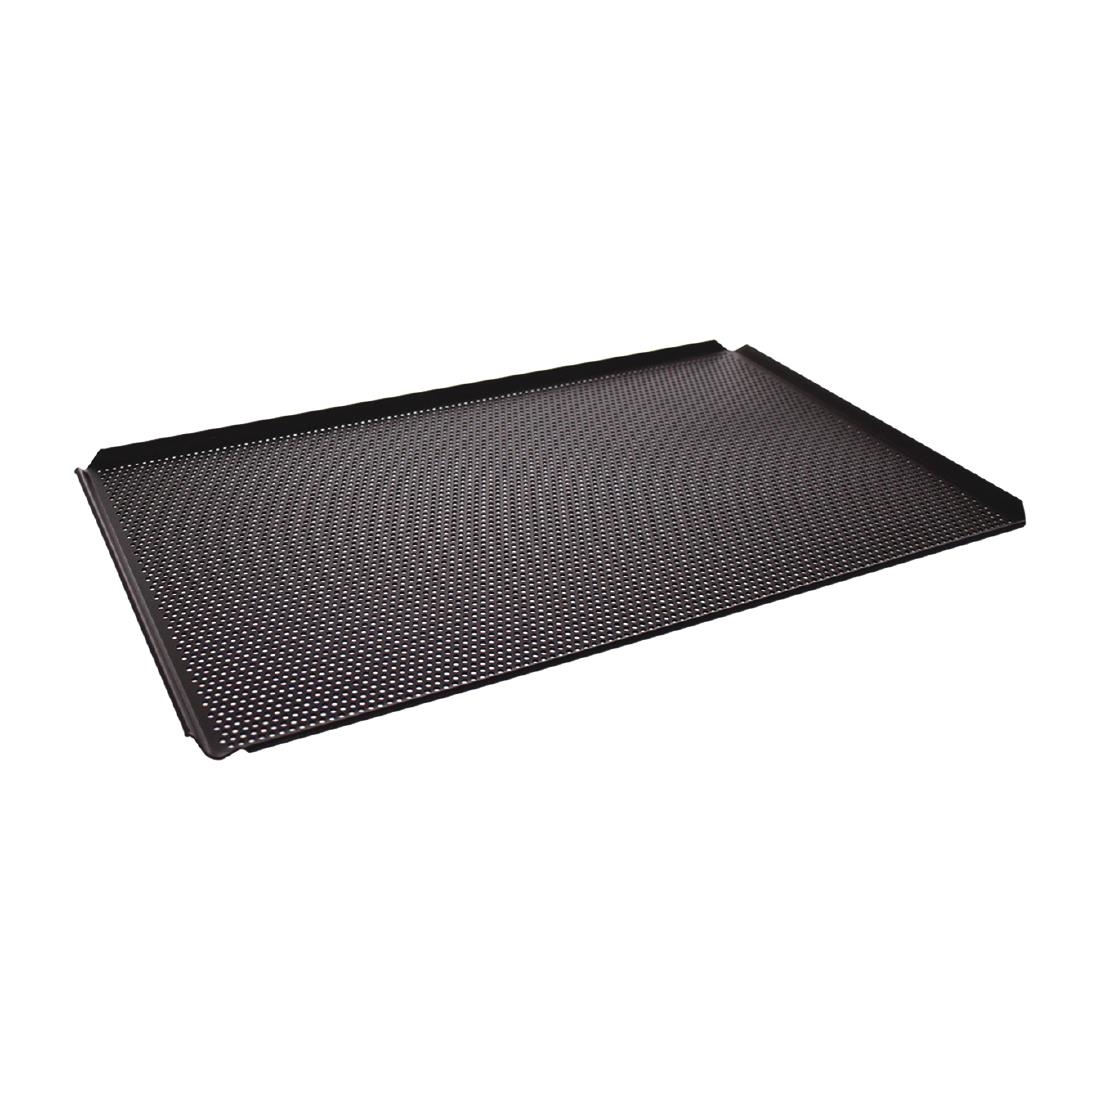 Baking Tray Perforated Aluminium GN size 530 x325 mm non stick